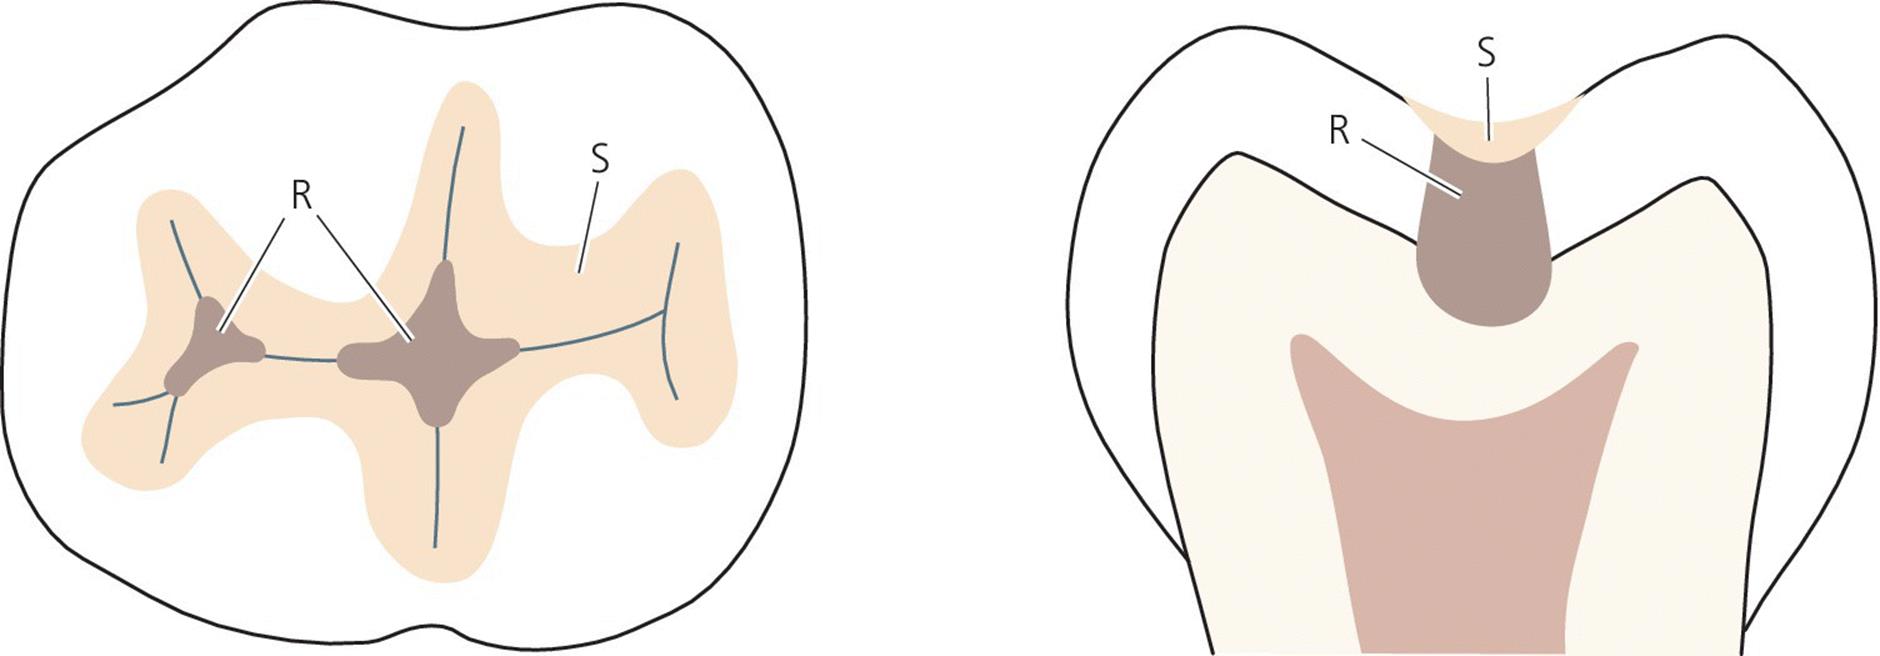 Two illustrations of the tooth in occusal (left) and cross-sectional views (right), depicting preventive resin/GIC restoration.